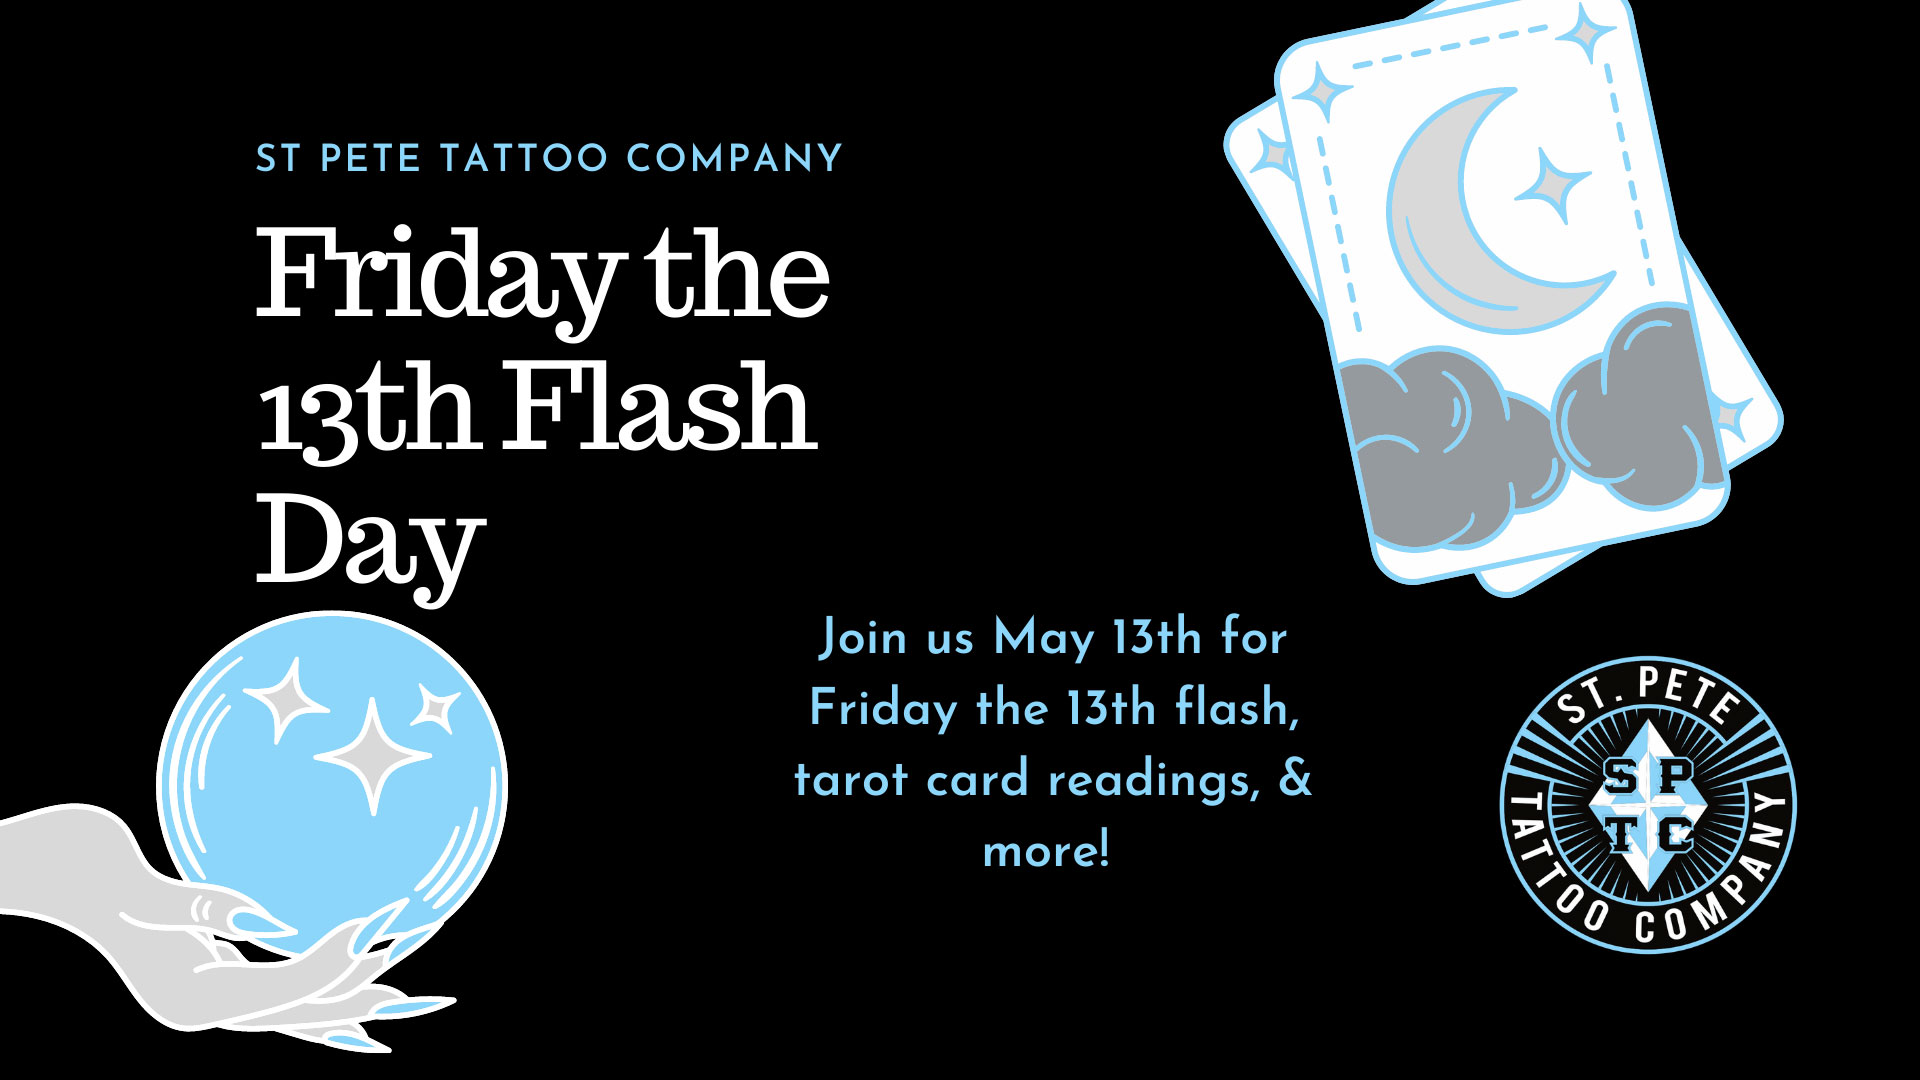 Friday the 13th Event at St. Pete Tattoo Company in St. Pete, Florida